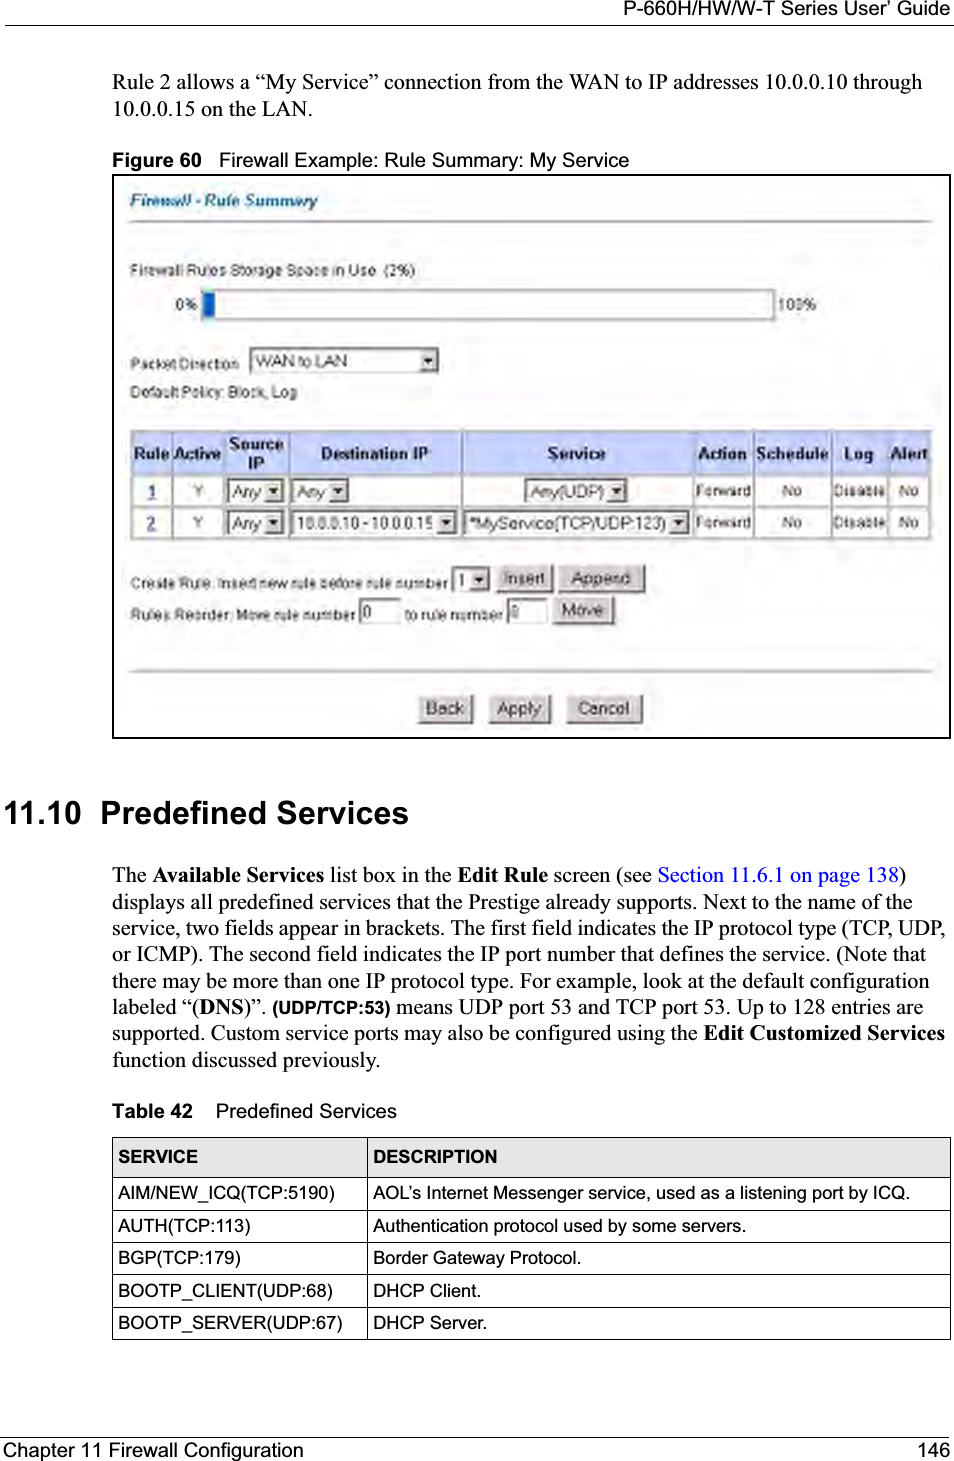 P-660H/HW/W-T Series User’ GuideChapter 11 Firewall Configuration 146Rule 2 allows a “My Service” connection from the WAN to IP addresses 10.0.0.10 through 10.0.0.15 on the LAN.Figure 60   Firewall Example: Rule Summary: My Service 11.10  Predefined ServicesThe Available Services list box in the Edit Rule screen (see Section 11.6.1 on page 138)displays all predefined services that the Prestige already supports. Next to the name of the service, two fields appear in brackets. The first field indicates the IP protocol type (TCP, UDP, or ICMP). The second field indicates the IP port number that defines the service. (Note that there may be more than one IP protocol type. For example, look at the default configuration labeled “(DNS)”. (UDP/TCP:53) means UDP port 53 and TCP port 53. Up to 128 entries are supported. Custom service ports may also be configured using the Edit Customized Servicesfunction discussed previously.Table 42    Predefined ServicesSERVICE DESCRIPTIONAIM/NEW_ICQ(TCP:5190) AOL’s Internet Messenger service, used as a listening port by ICQ.AUTH(TCP:113) Authentication protocol used by some servers.BGP(TCP:179) Border Gateway Protocol.BOOTP_CLIENT(UDP:68)  DHCP Client.BOOTP_SERVER(UDP:67)  DHCP Server.